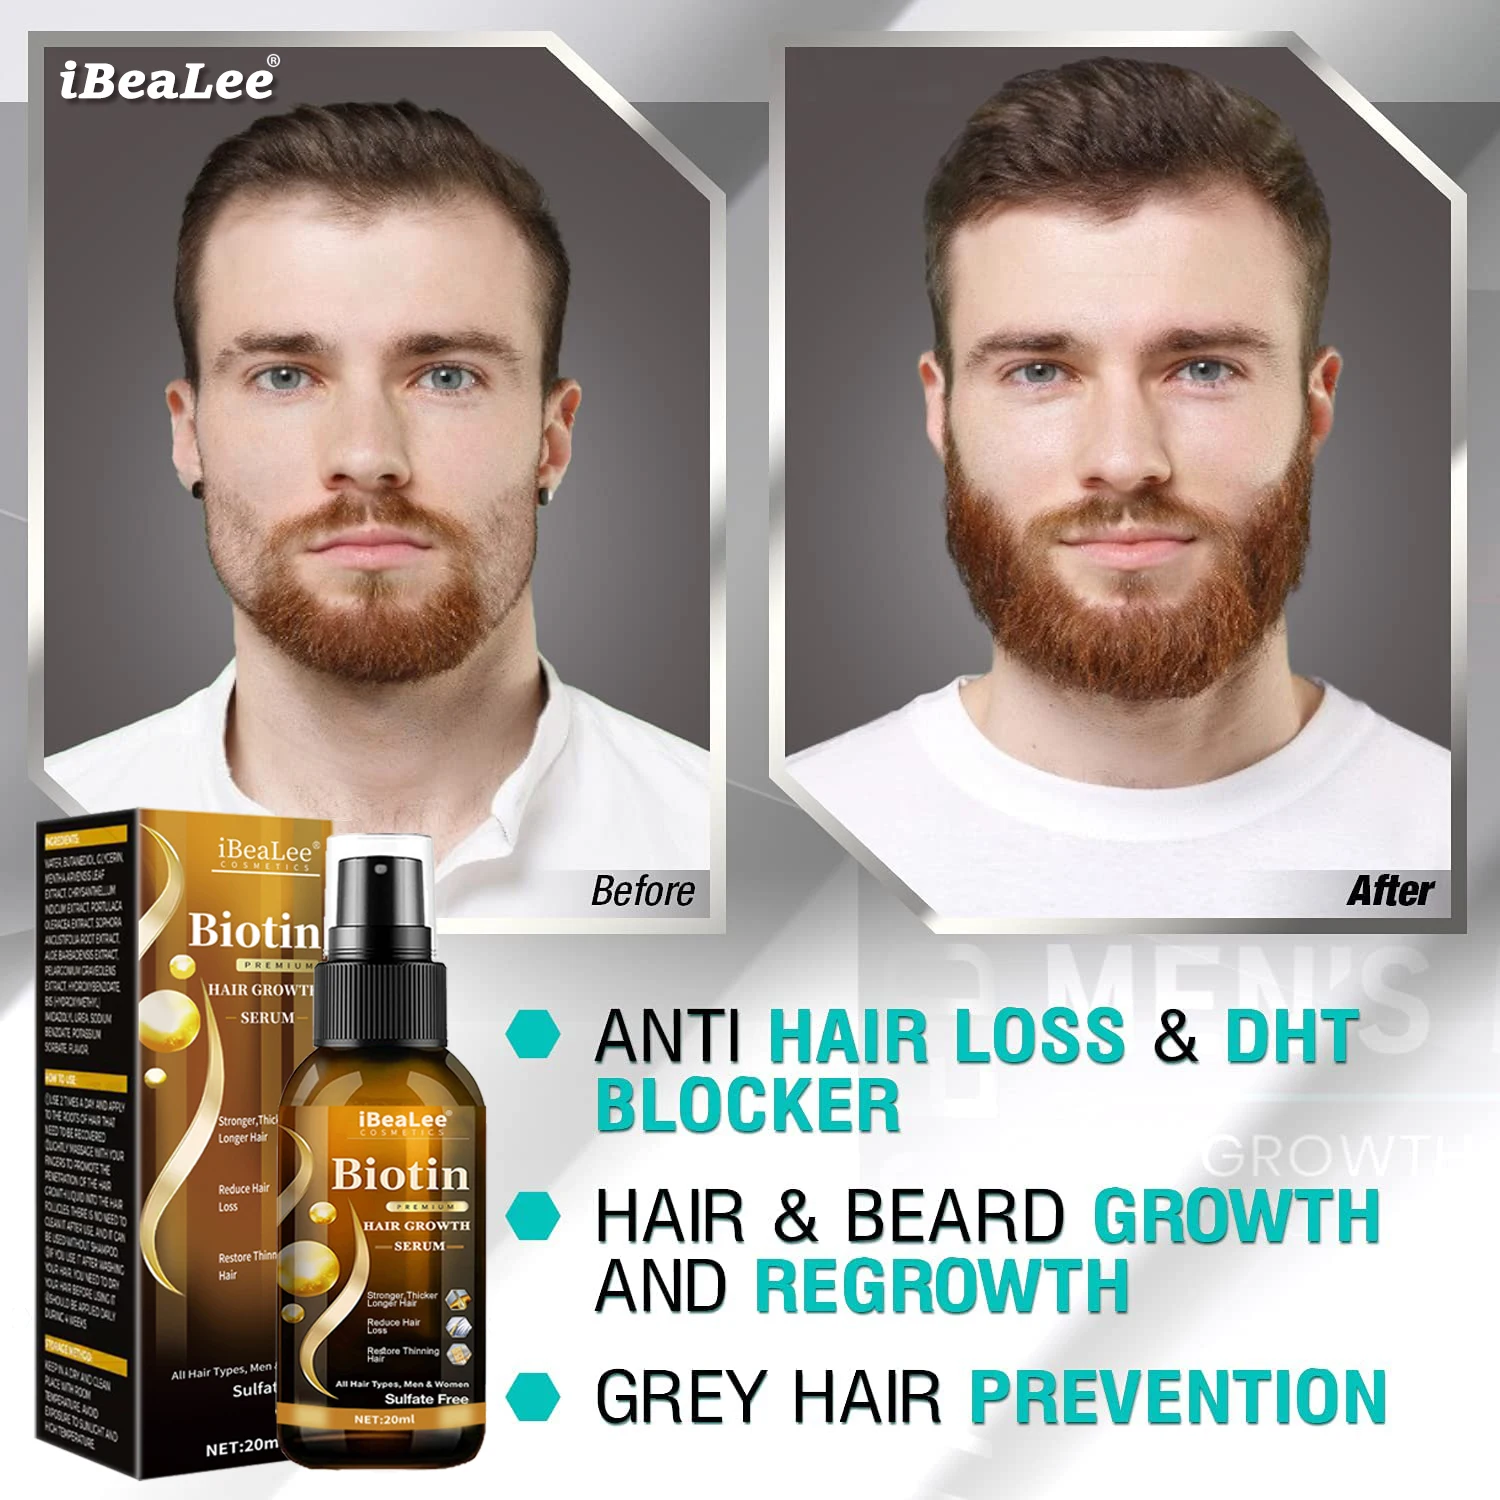 

iBeaLee Hair Growth Products Biotin Fast Growing Hair Care Essential Oils Anti Hair Loss Spray Scalp Treatment For Men Women